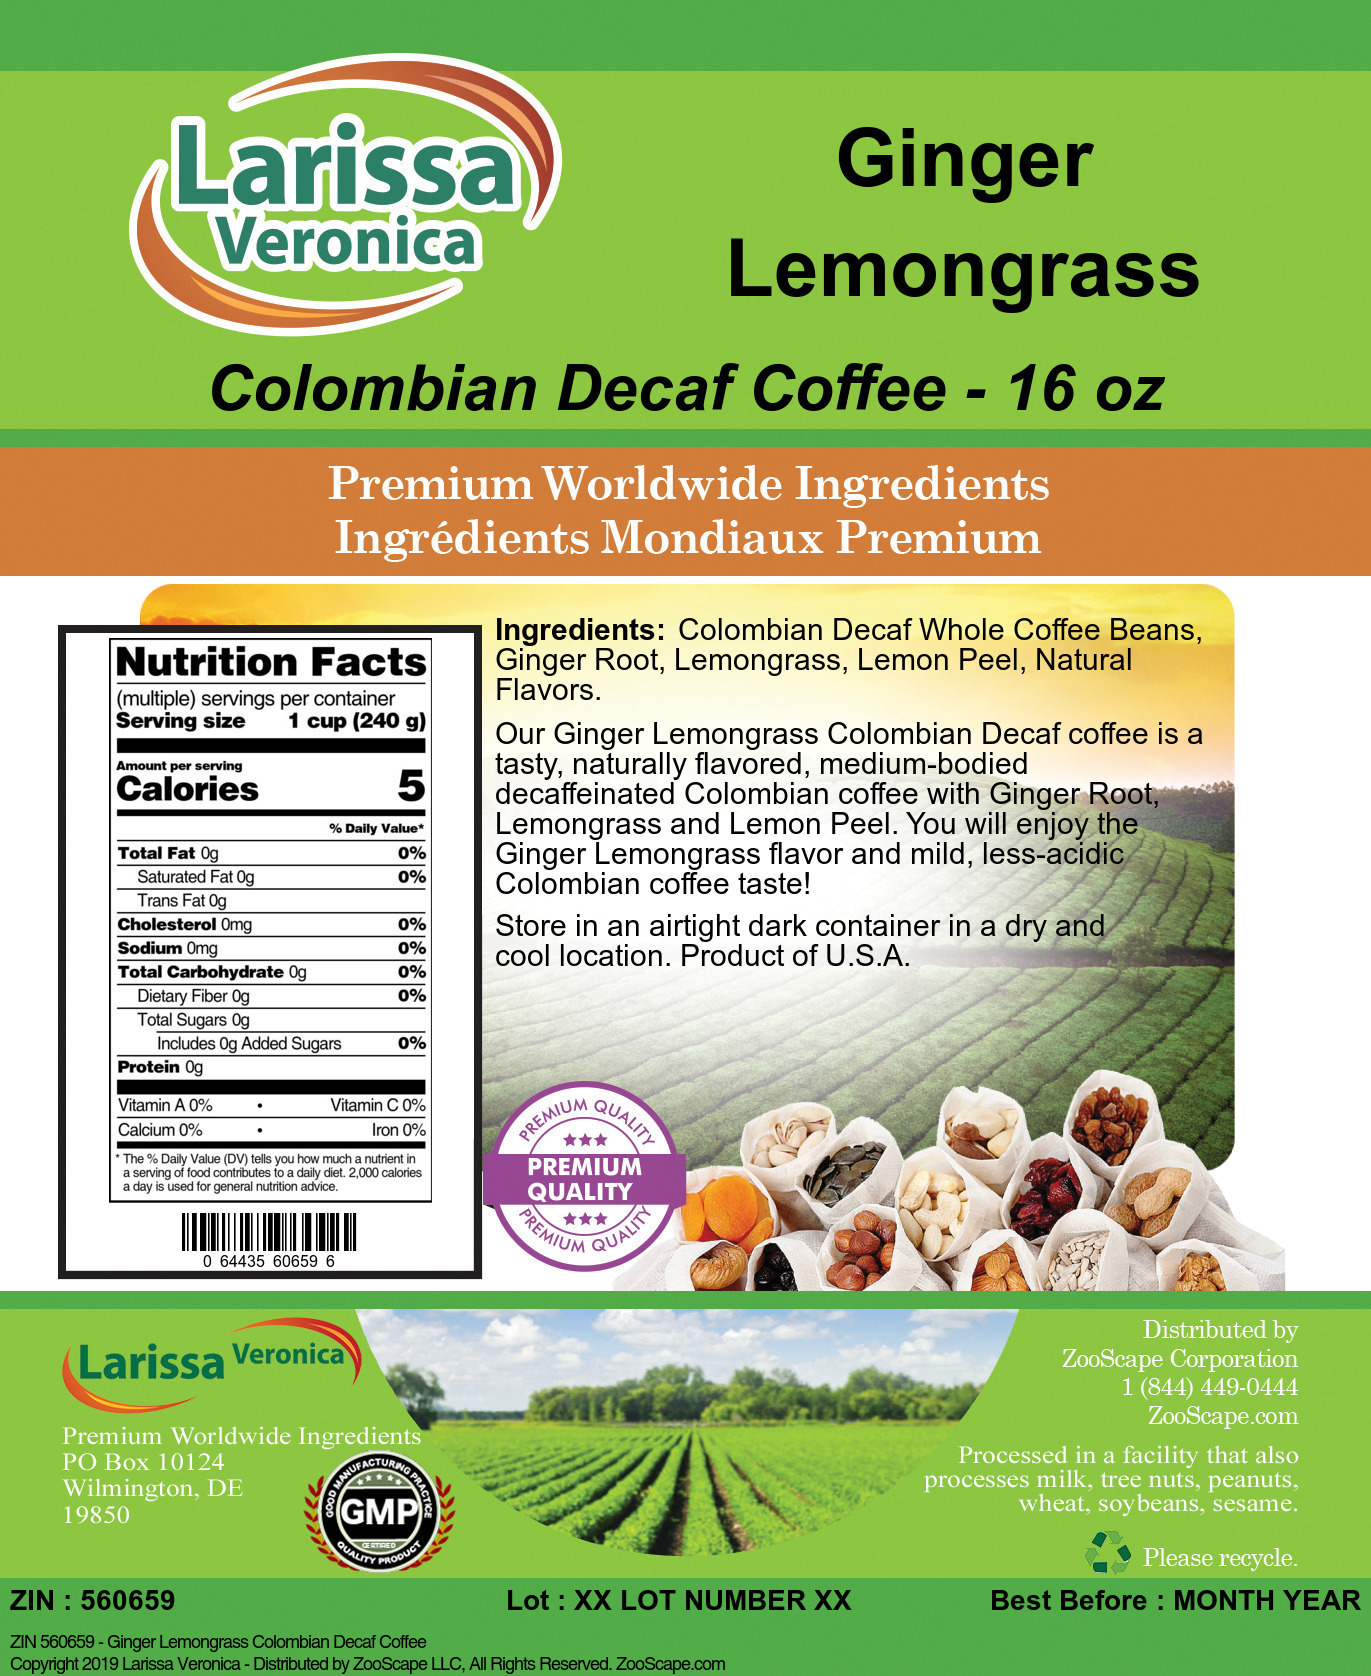 Ginger Lemongrass Colombian Decaf Coffee - Label